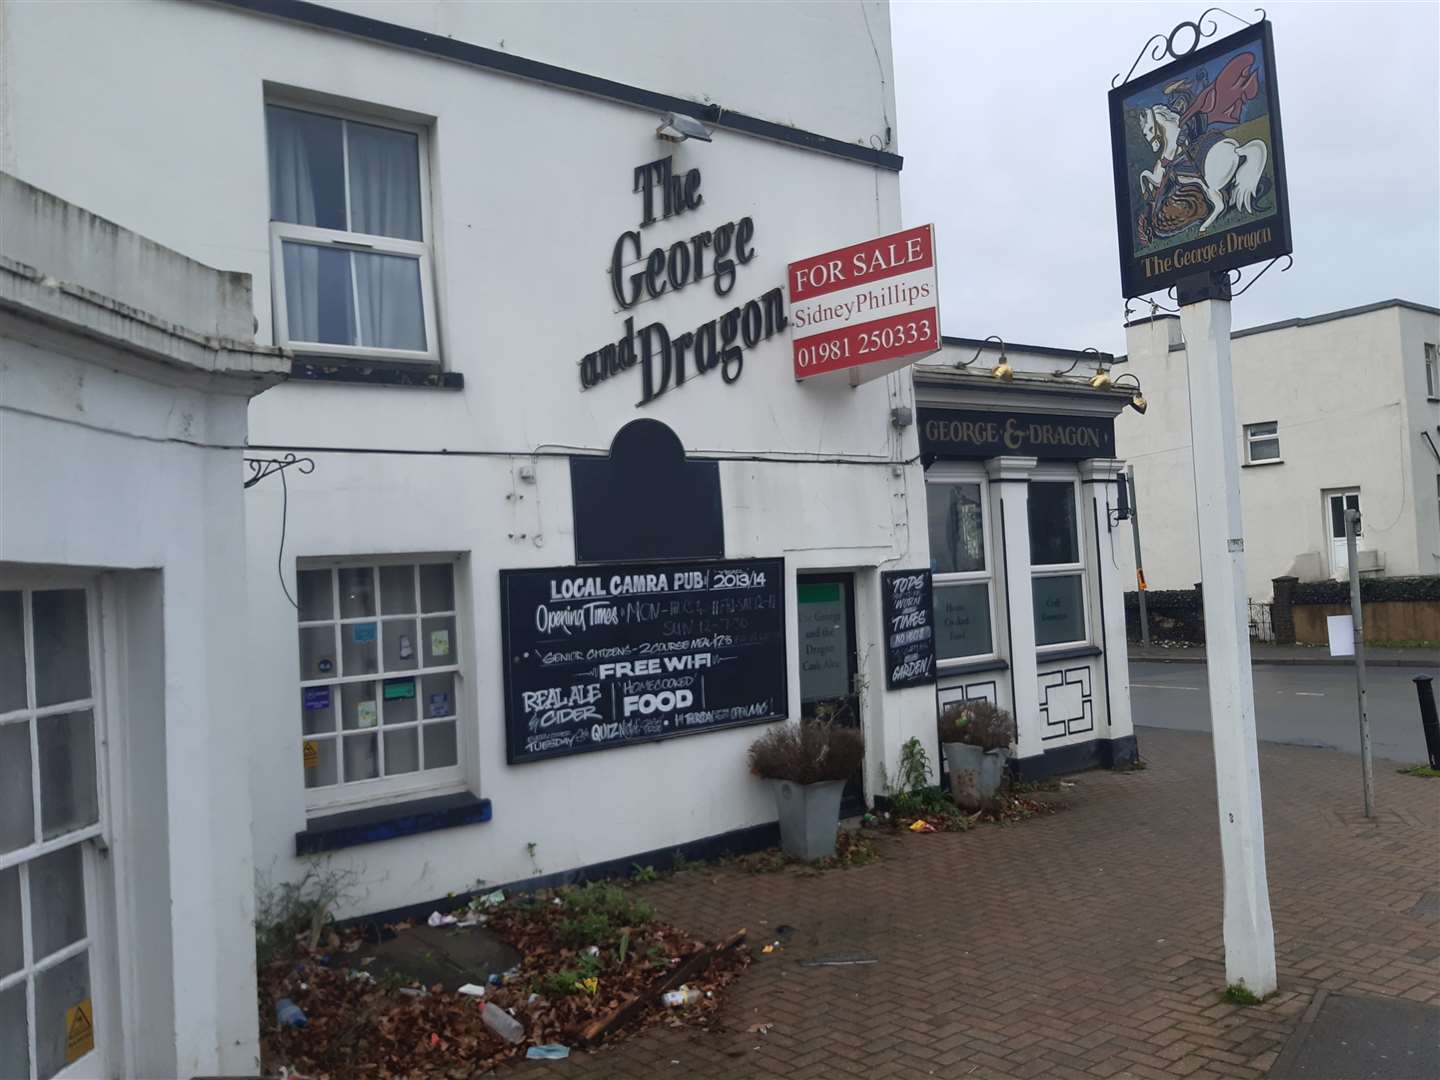 The George and Dragon Pub in Swanscombe